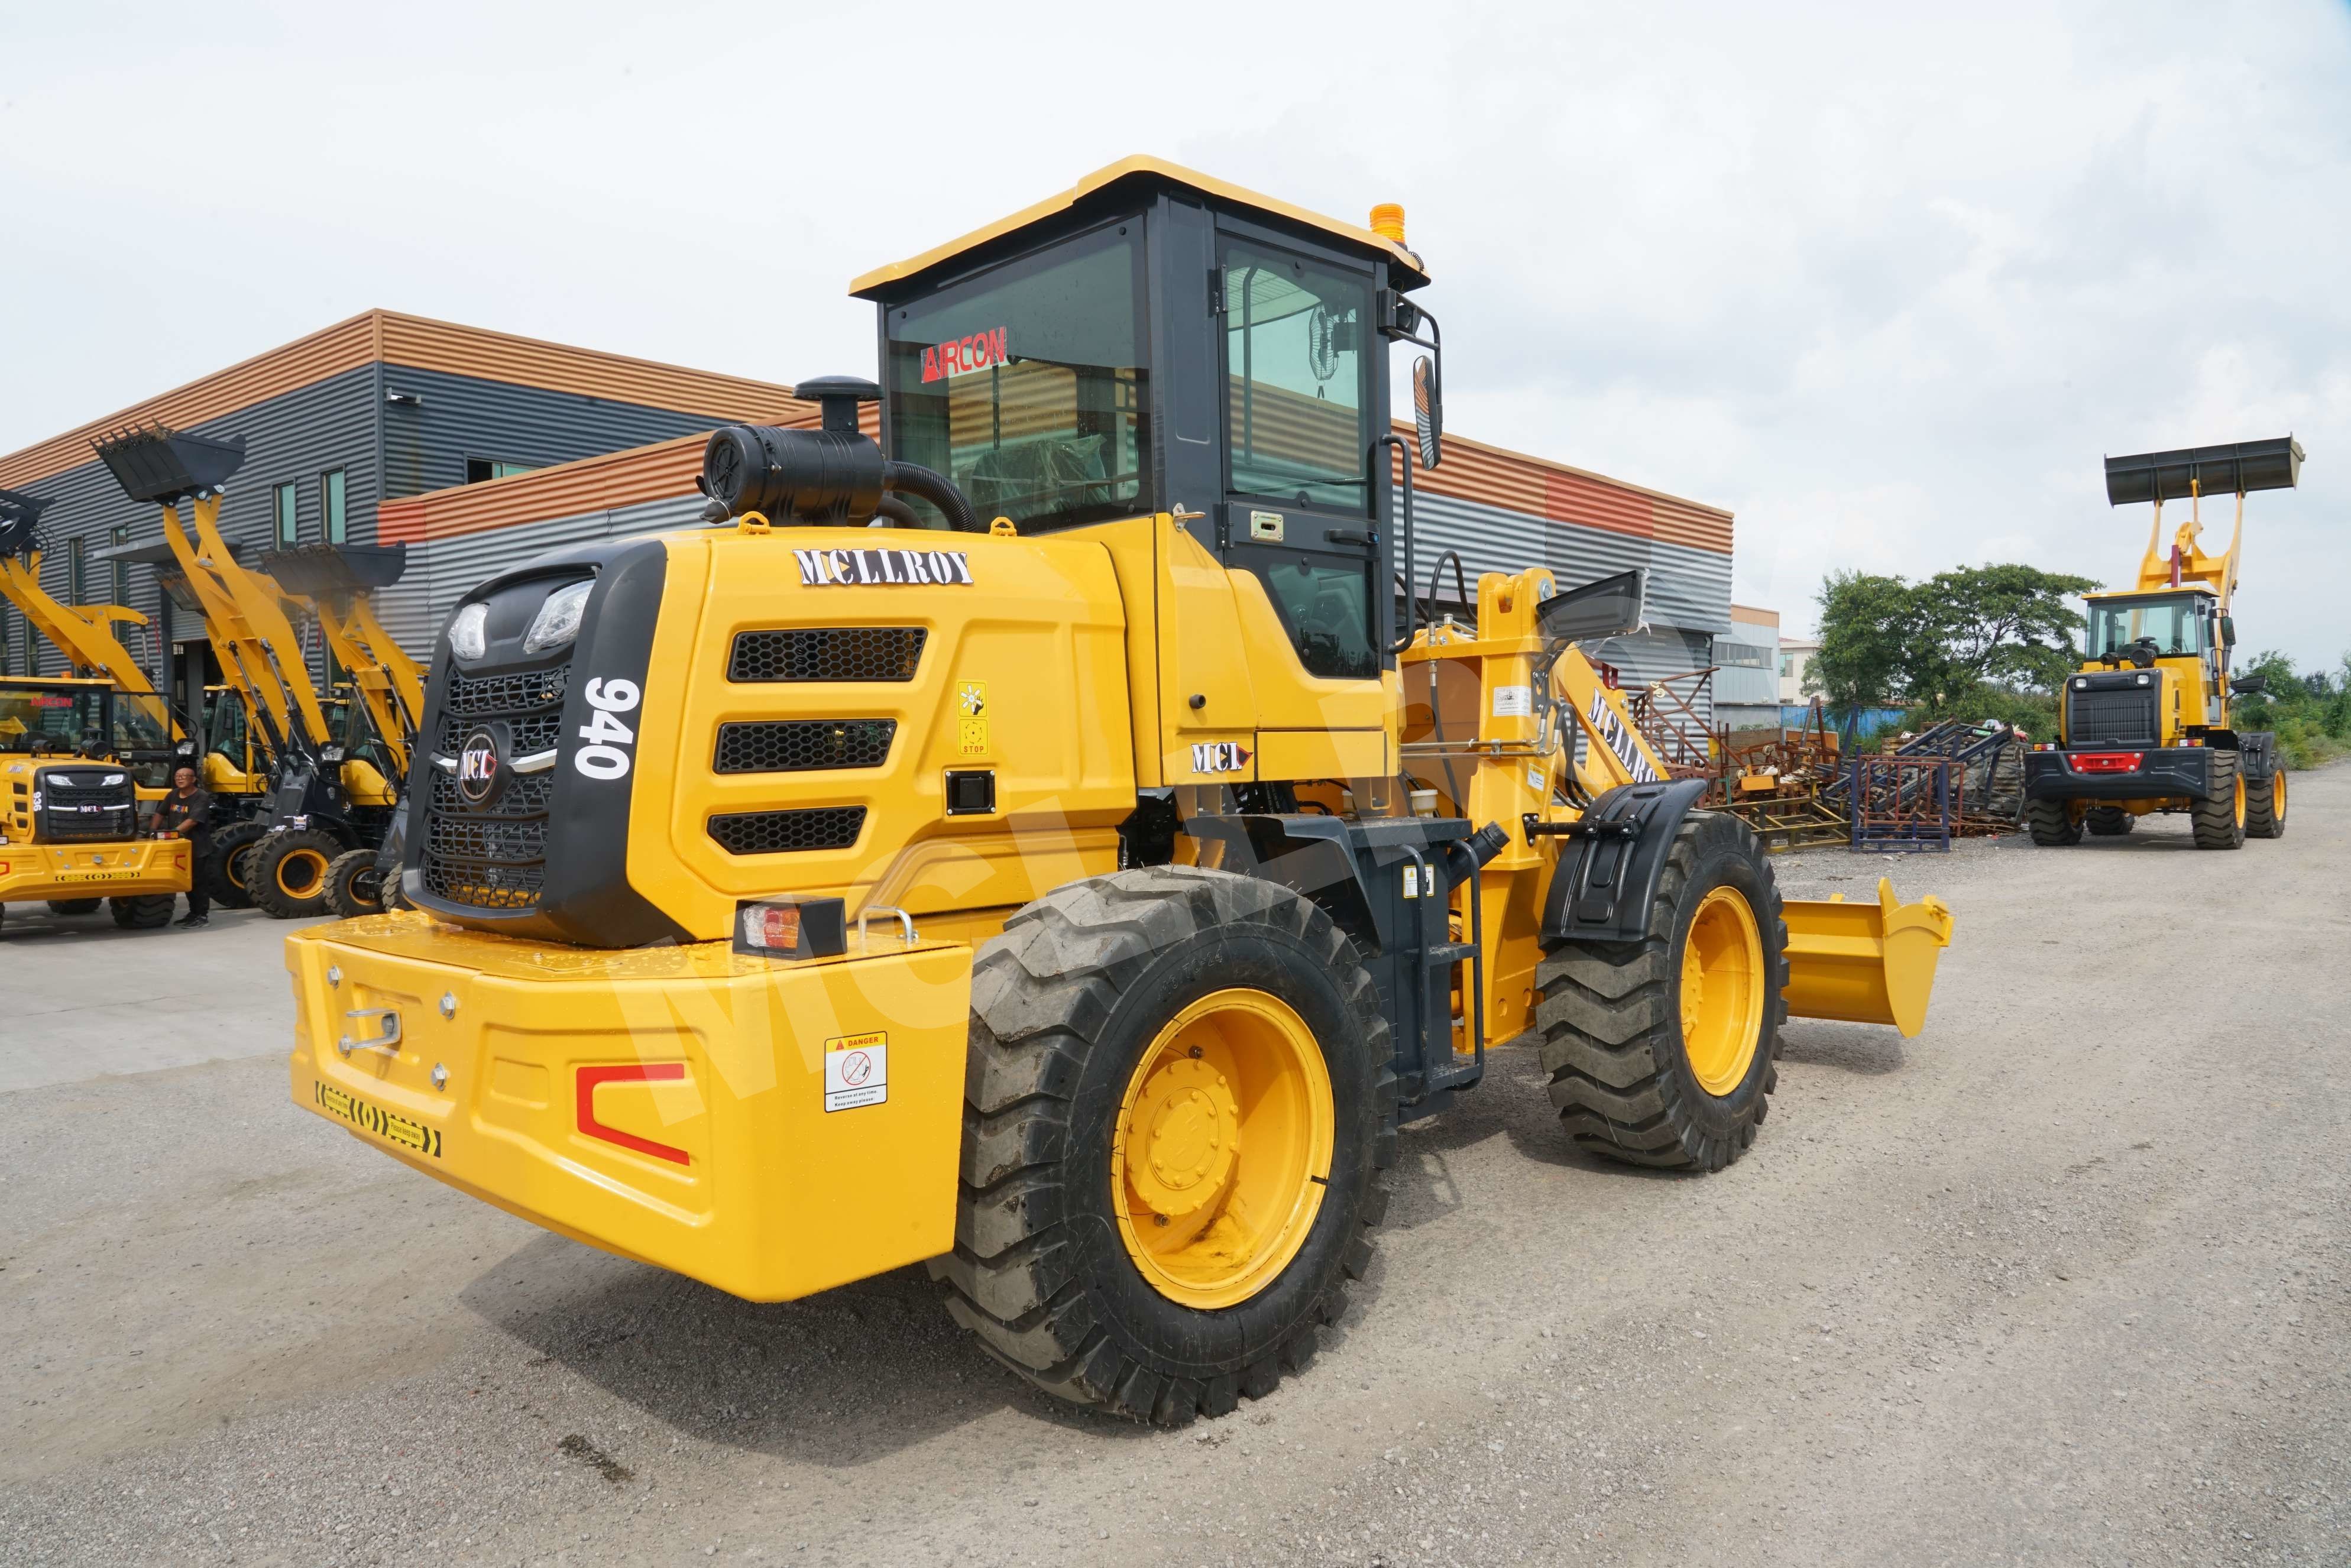 1.2m3 76kW Compact Wheel Loader Multifunctional In Construction Agricultural